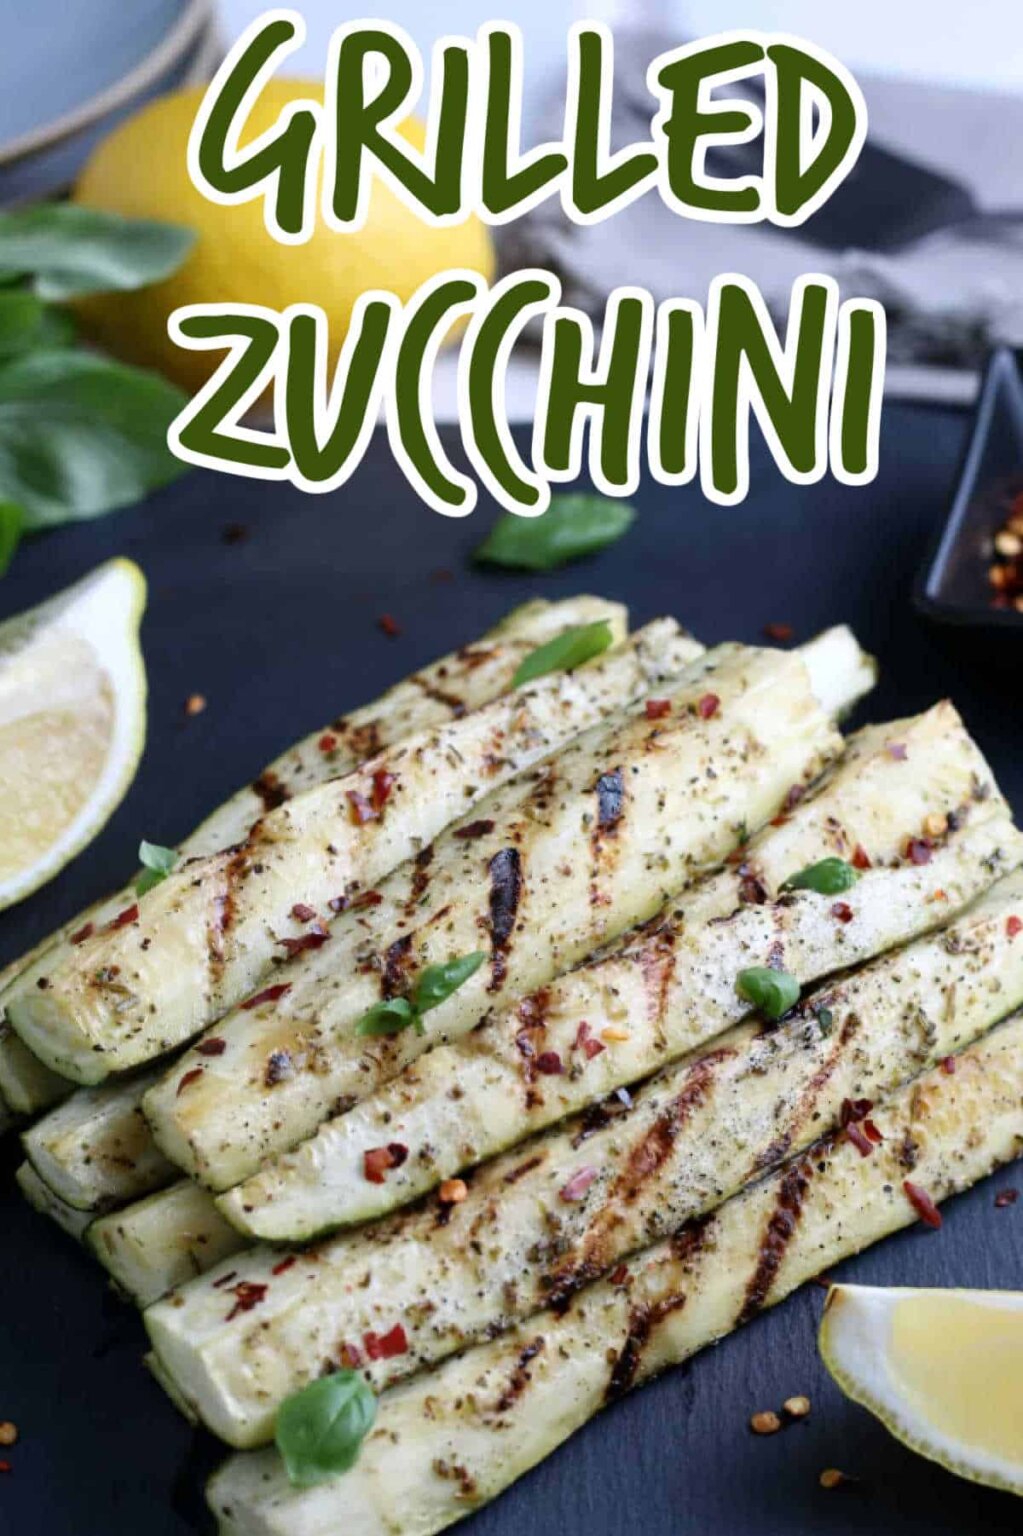 Grilled Zucchini Recipe How To - Vegan in the Freezer